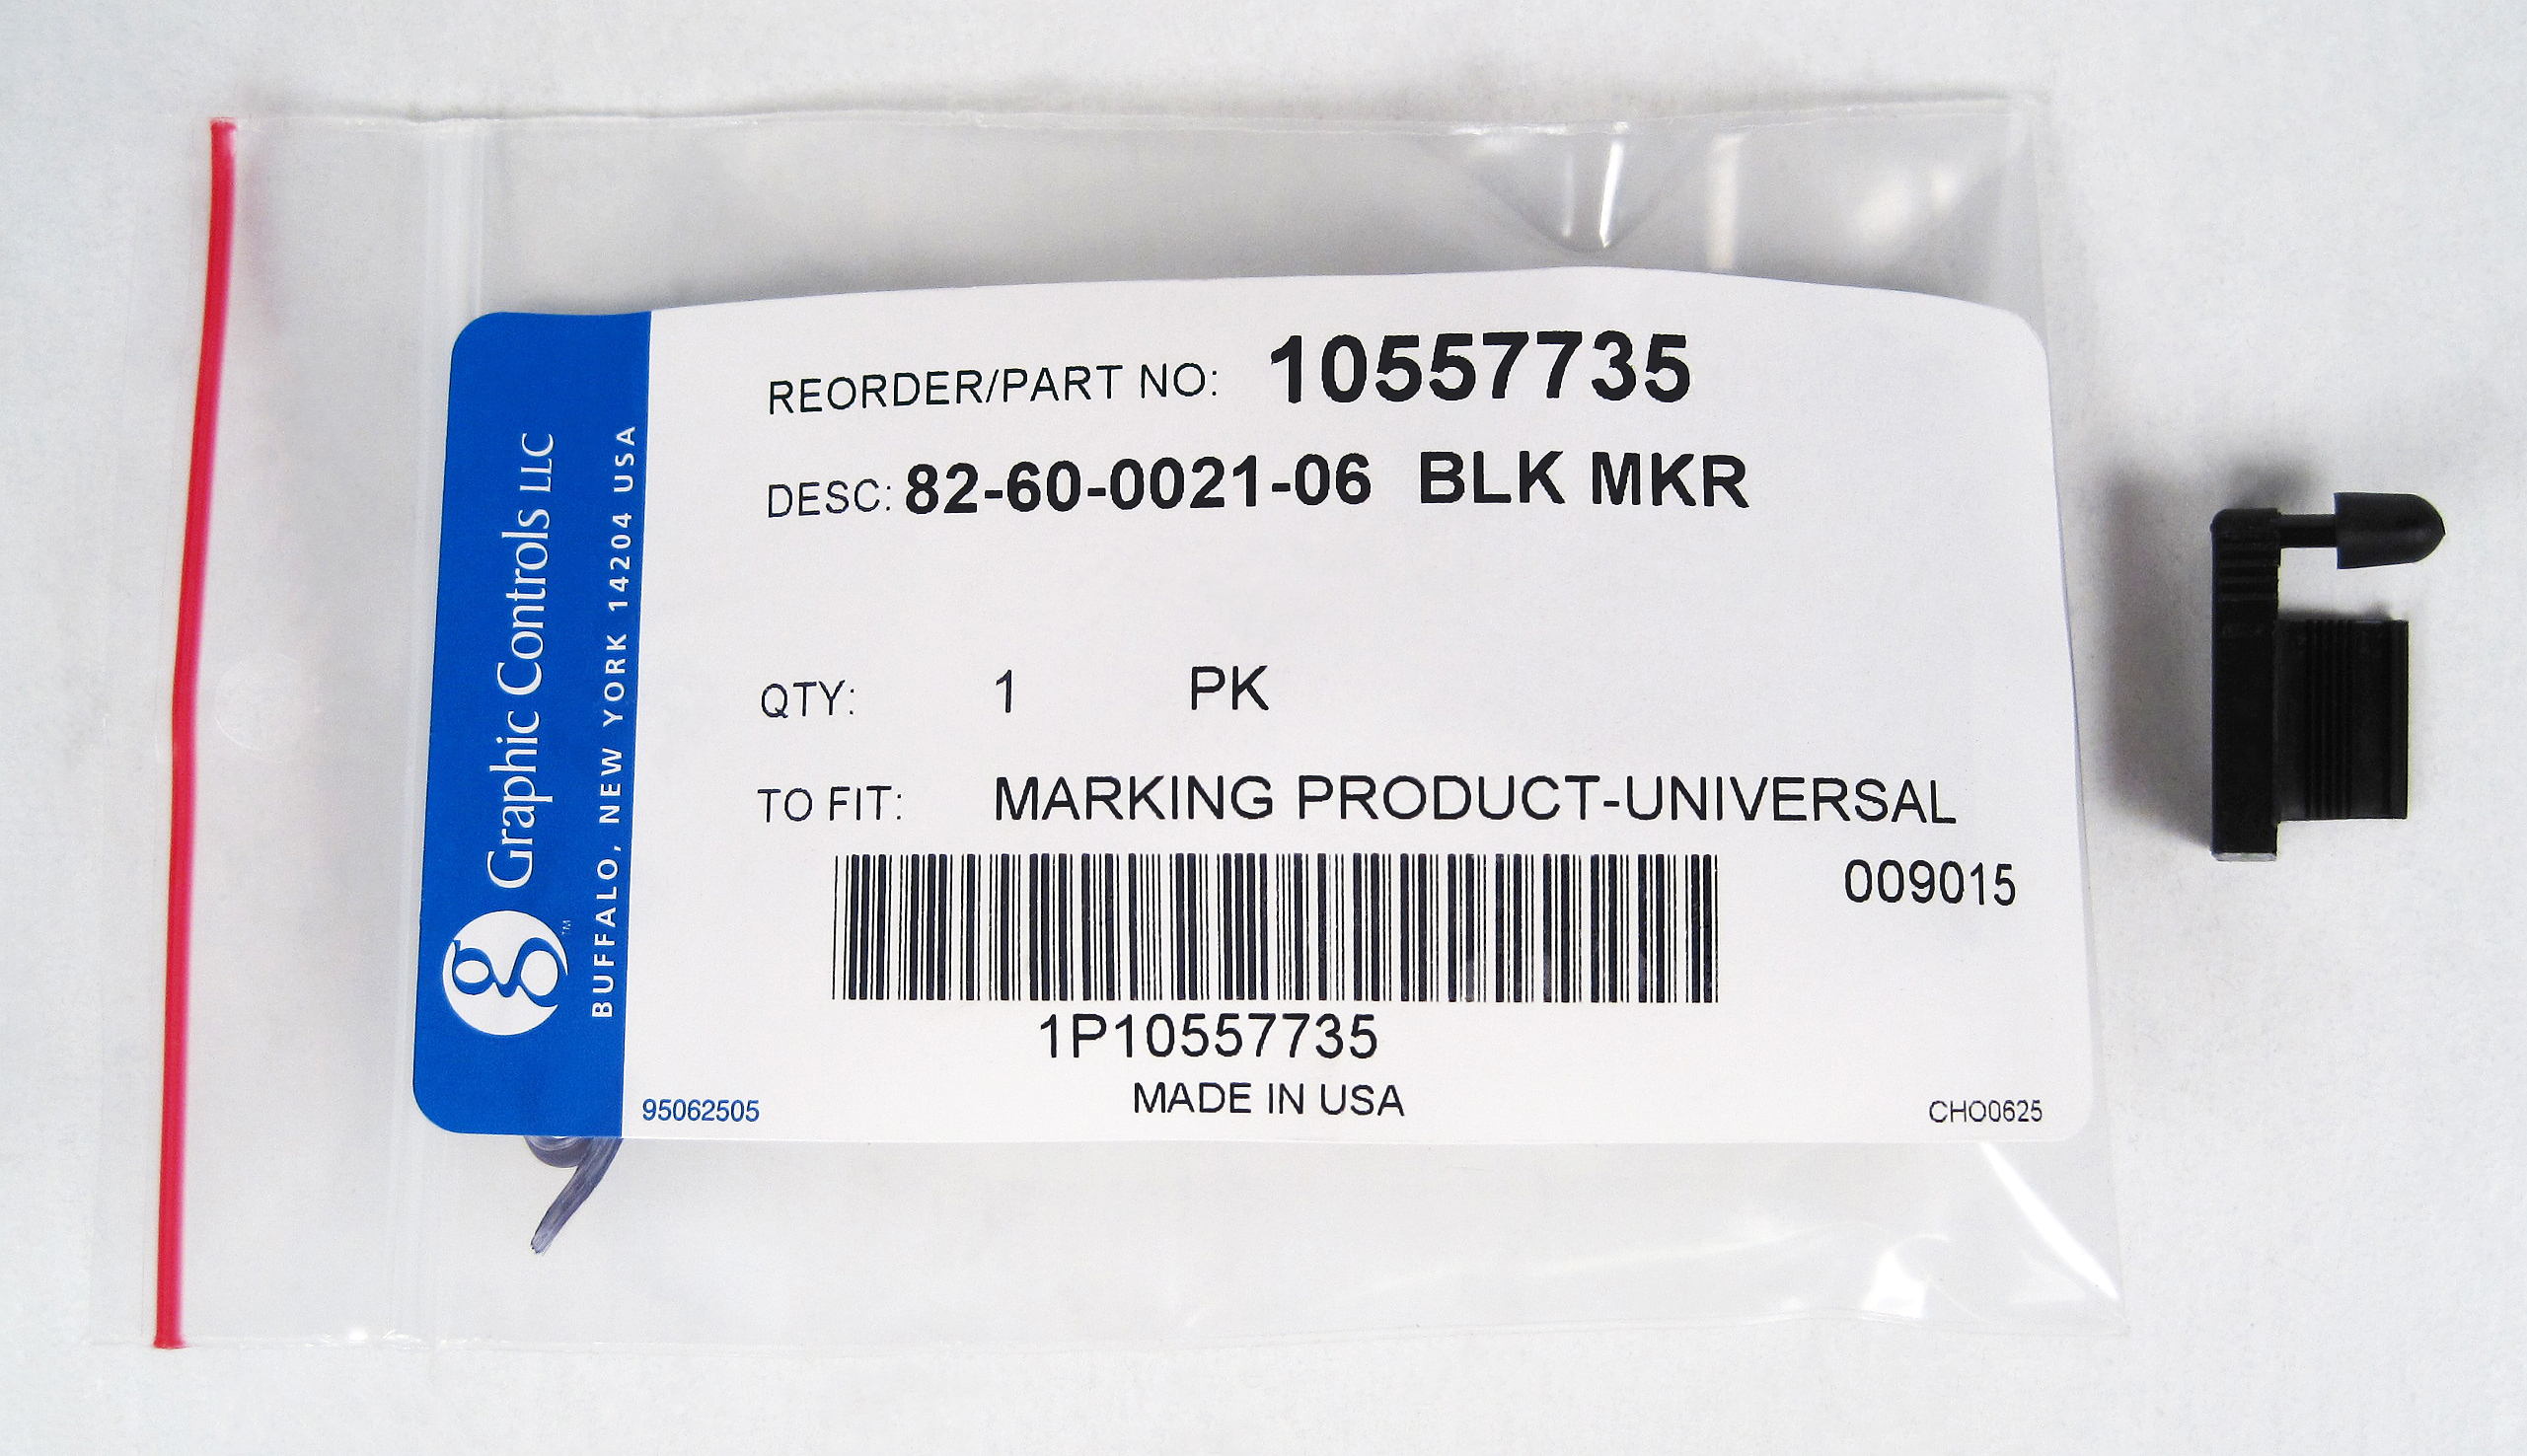 MP-MARKING PRODUCT-UNIVERSAL MP  82-60-0021-06  BLK MKR